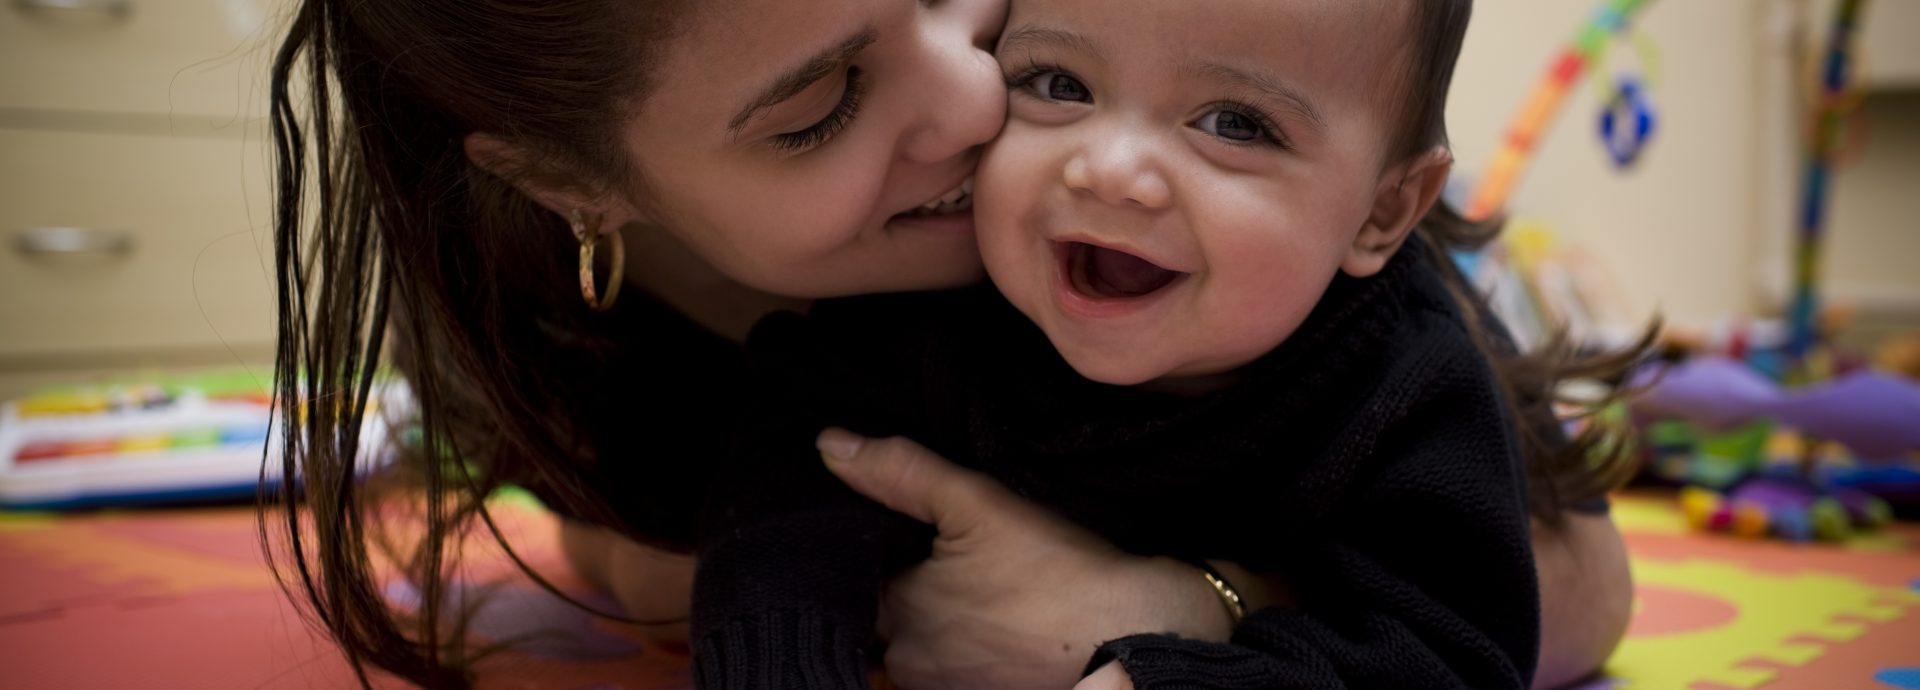 Adorable Hispanic Young Mother and Son in Home Playroom